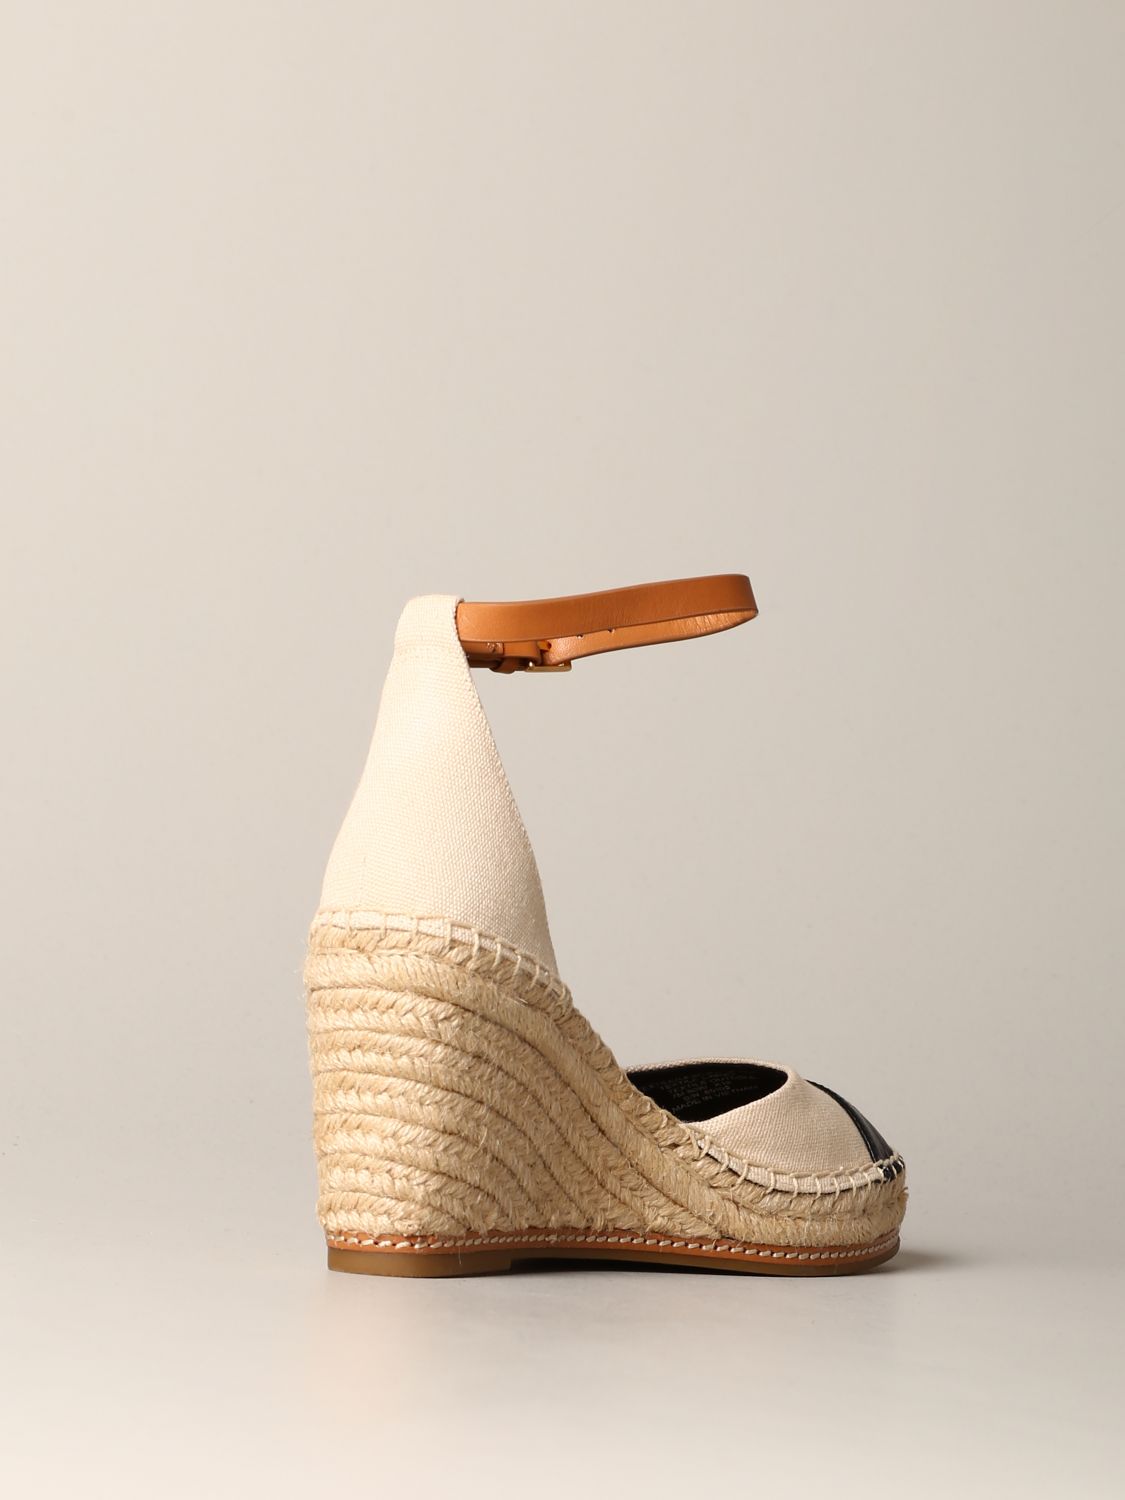 Tory Burch Outlet: wedge espadrilles in leather with contrasting tip and  emblem - Natural | Tory Burch espadrilles 65103 online on 